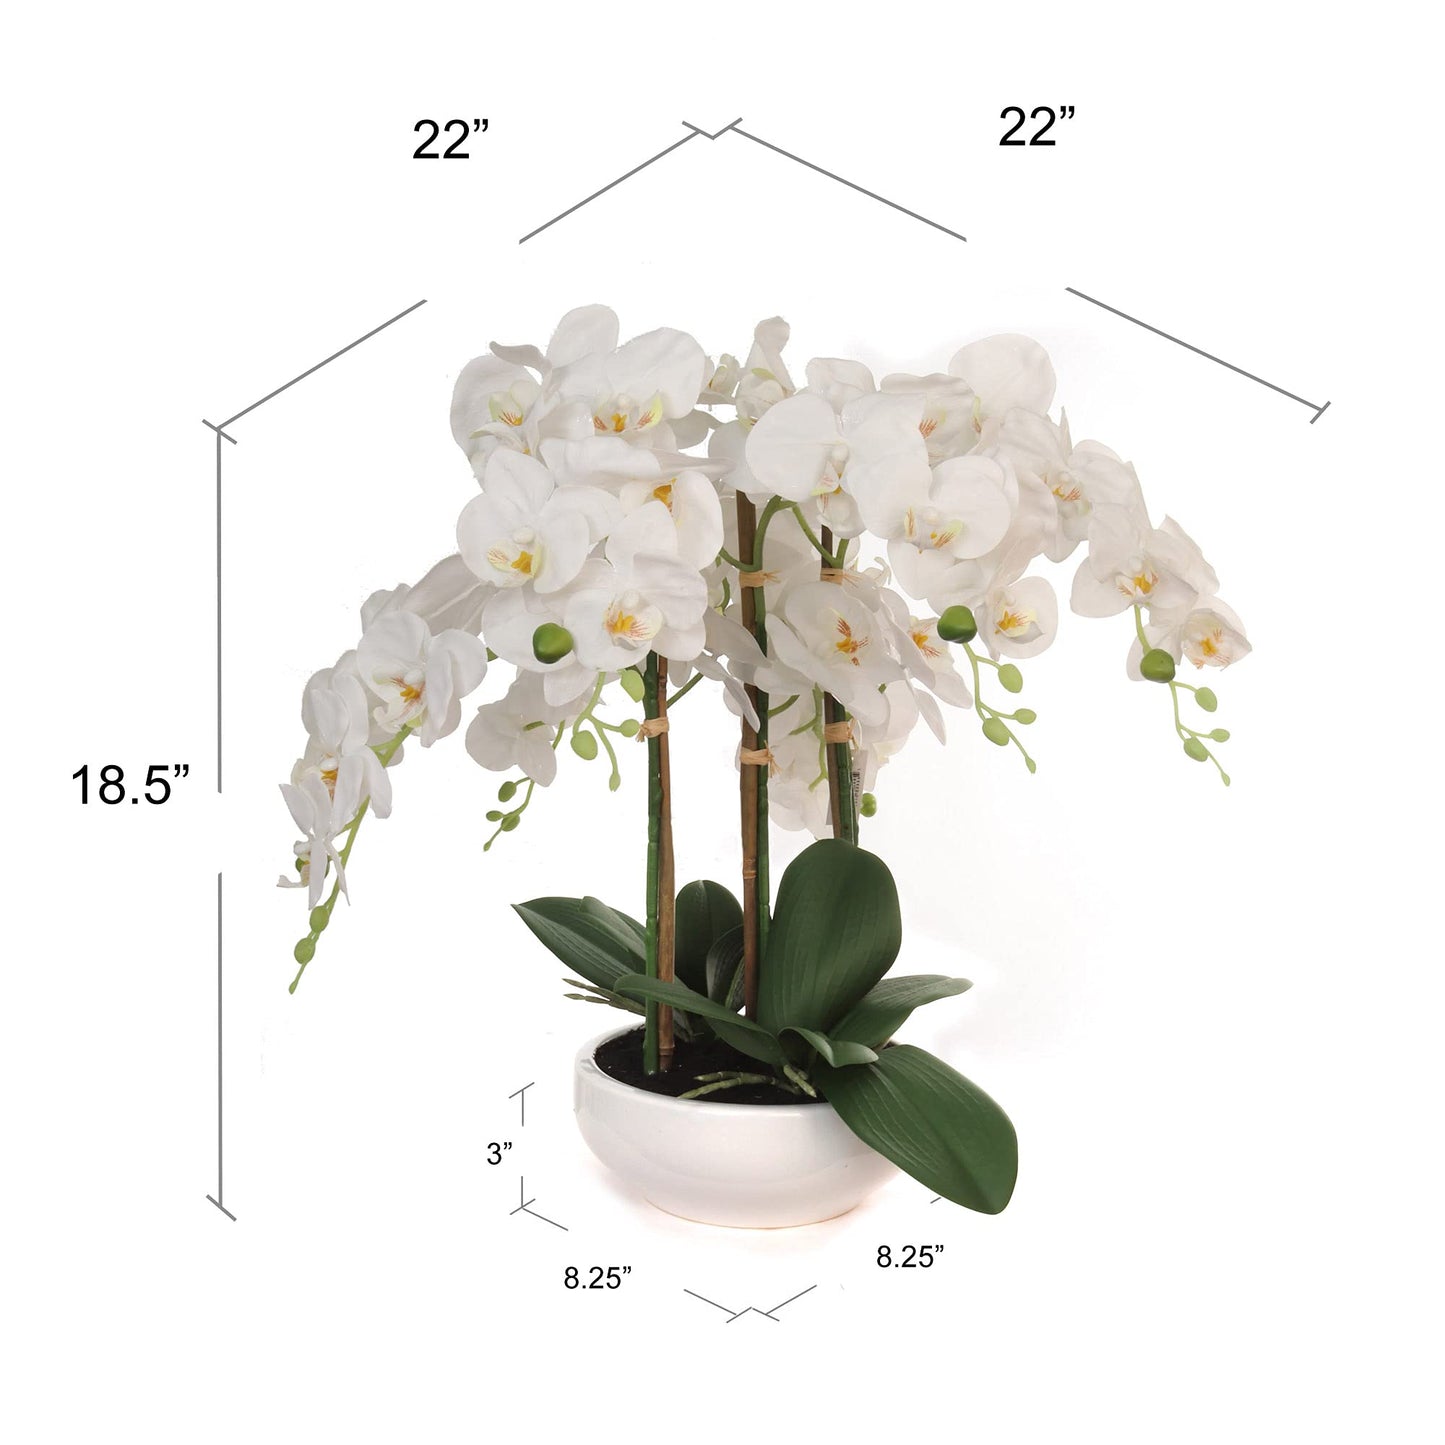 19"x13" Pristine White Phalaenopsis in 9" Designer Bowl - Premium Faux Orchid for Elegant Home & Event Displays - Lifelike Floral Centerpiece for Wedding, Parties & Luxurious Home Decor